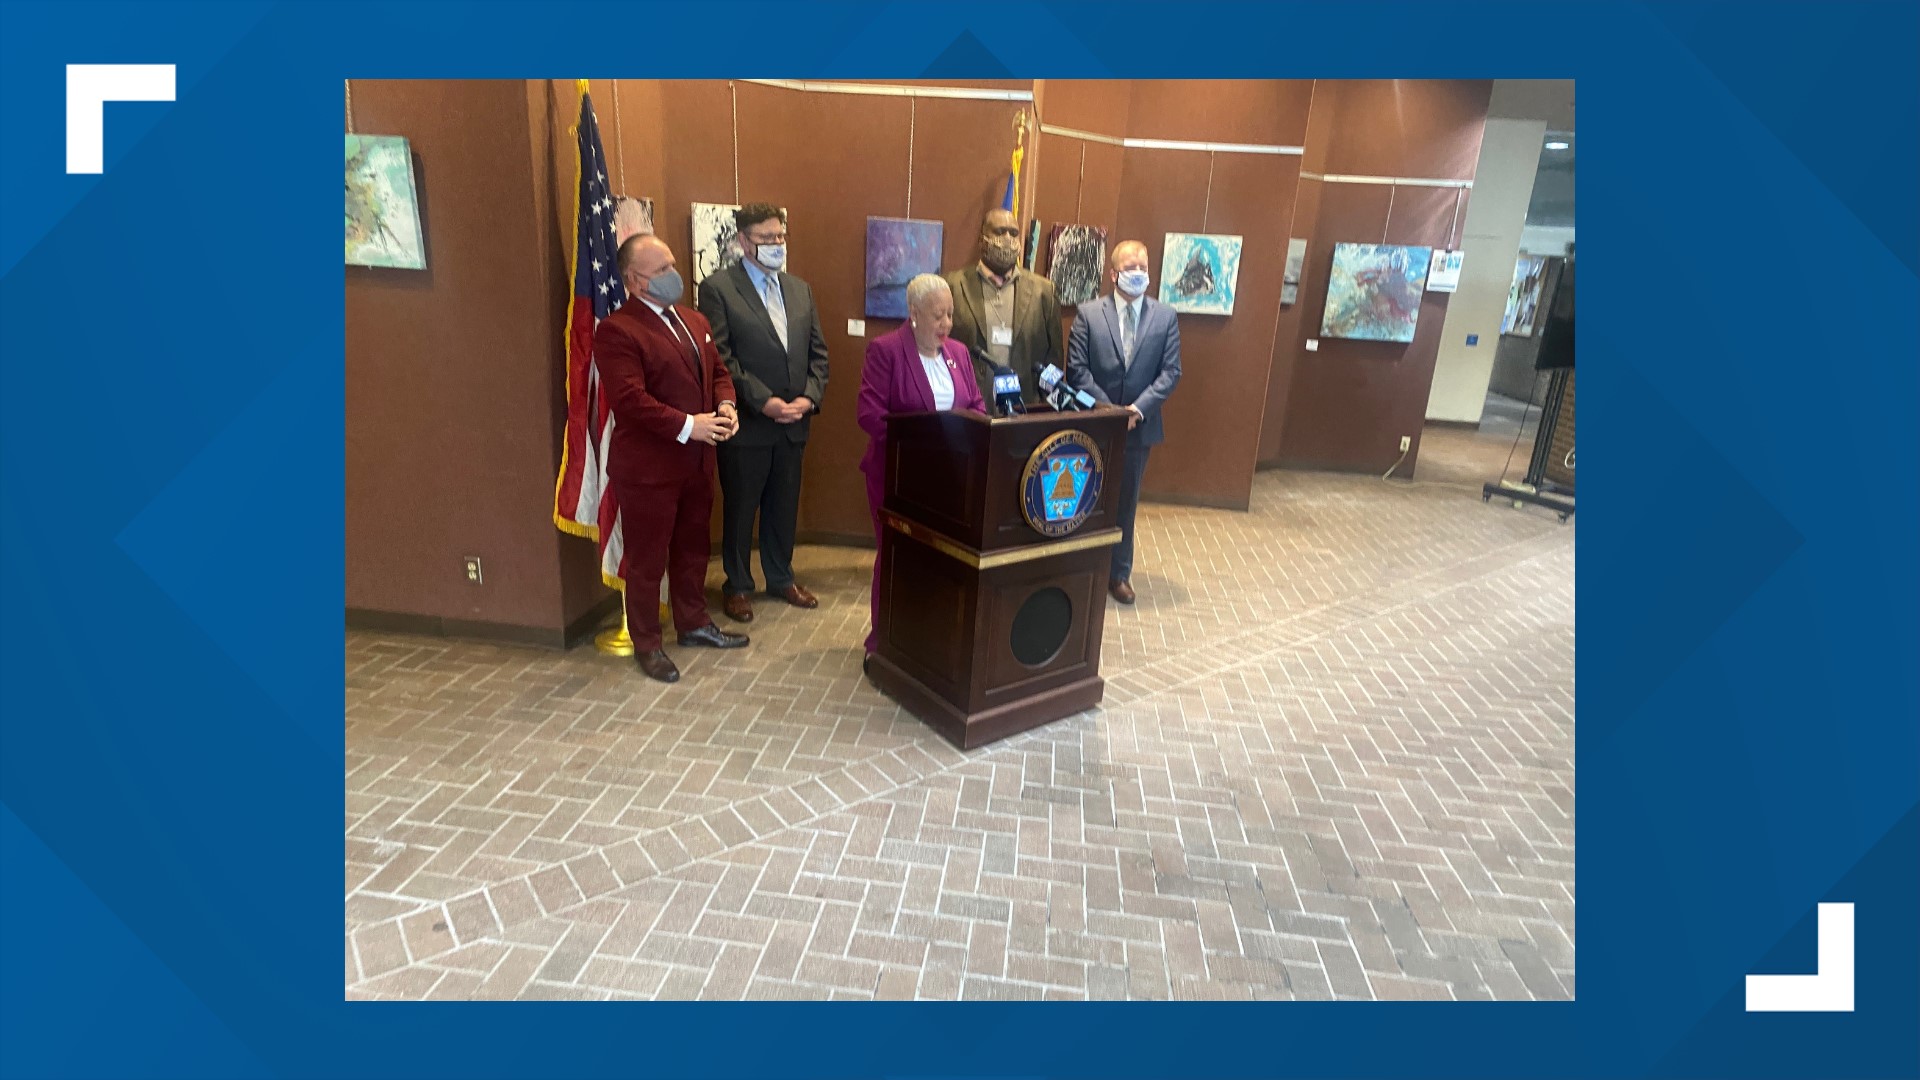 Officials will conduct a disparity study of minority-owned businesses in Harrisburg in order to provide support to under-resourced businesses.